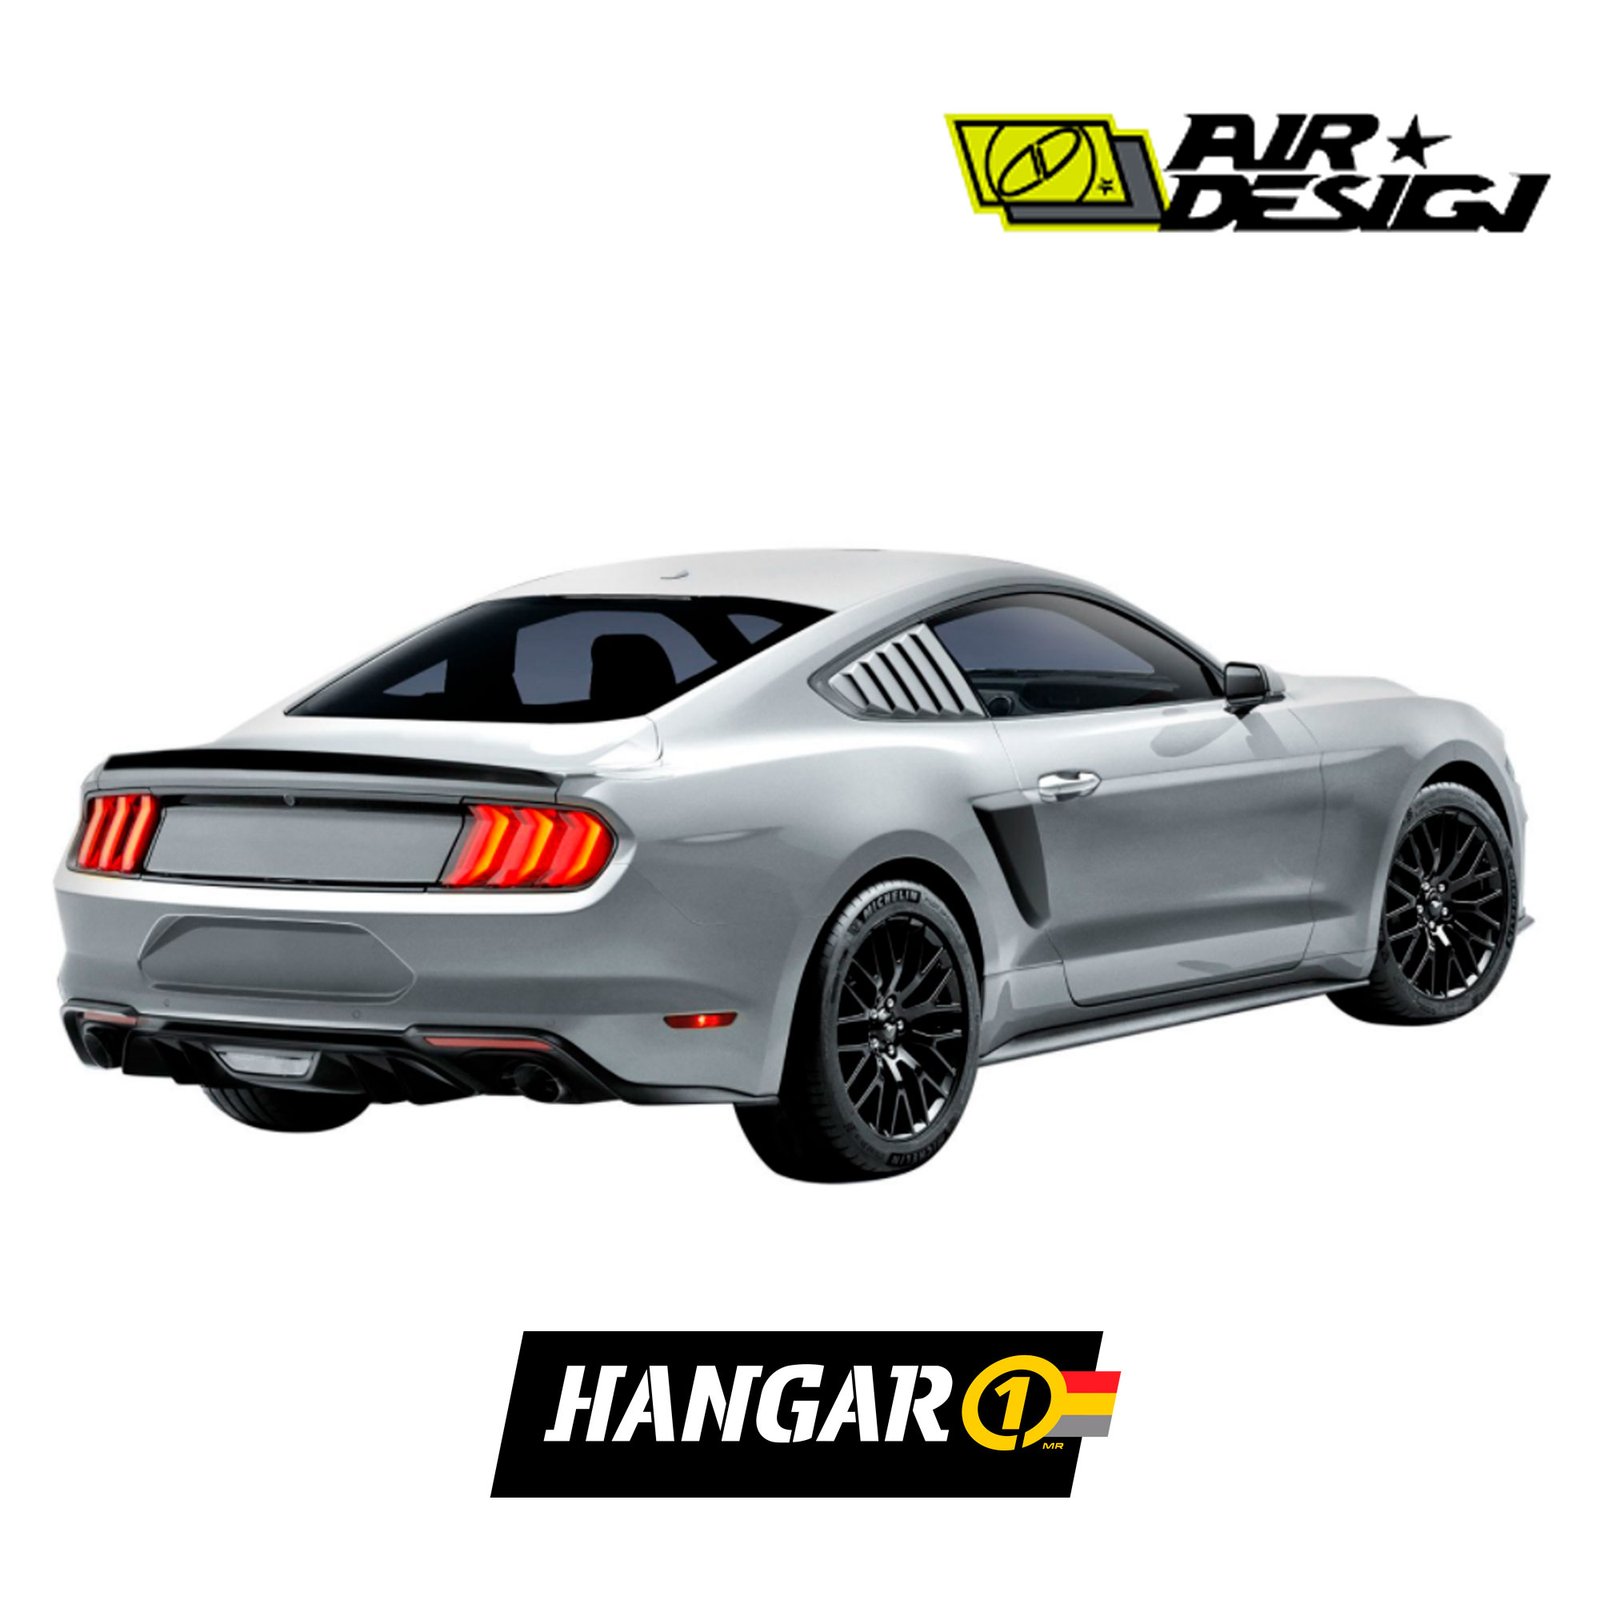 Panel Lateral Derecho para Ford Mustang (2015-2020)